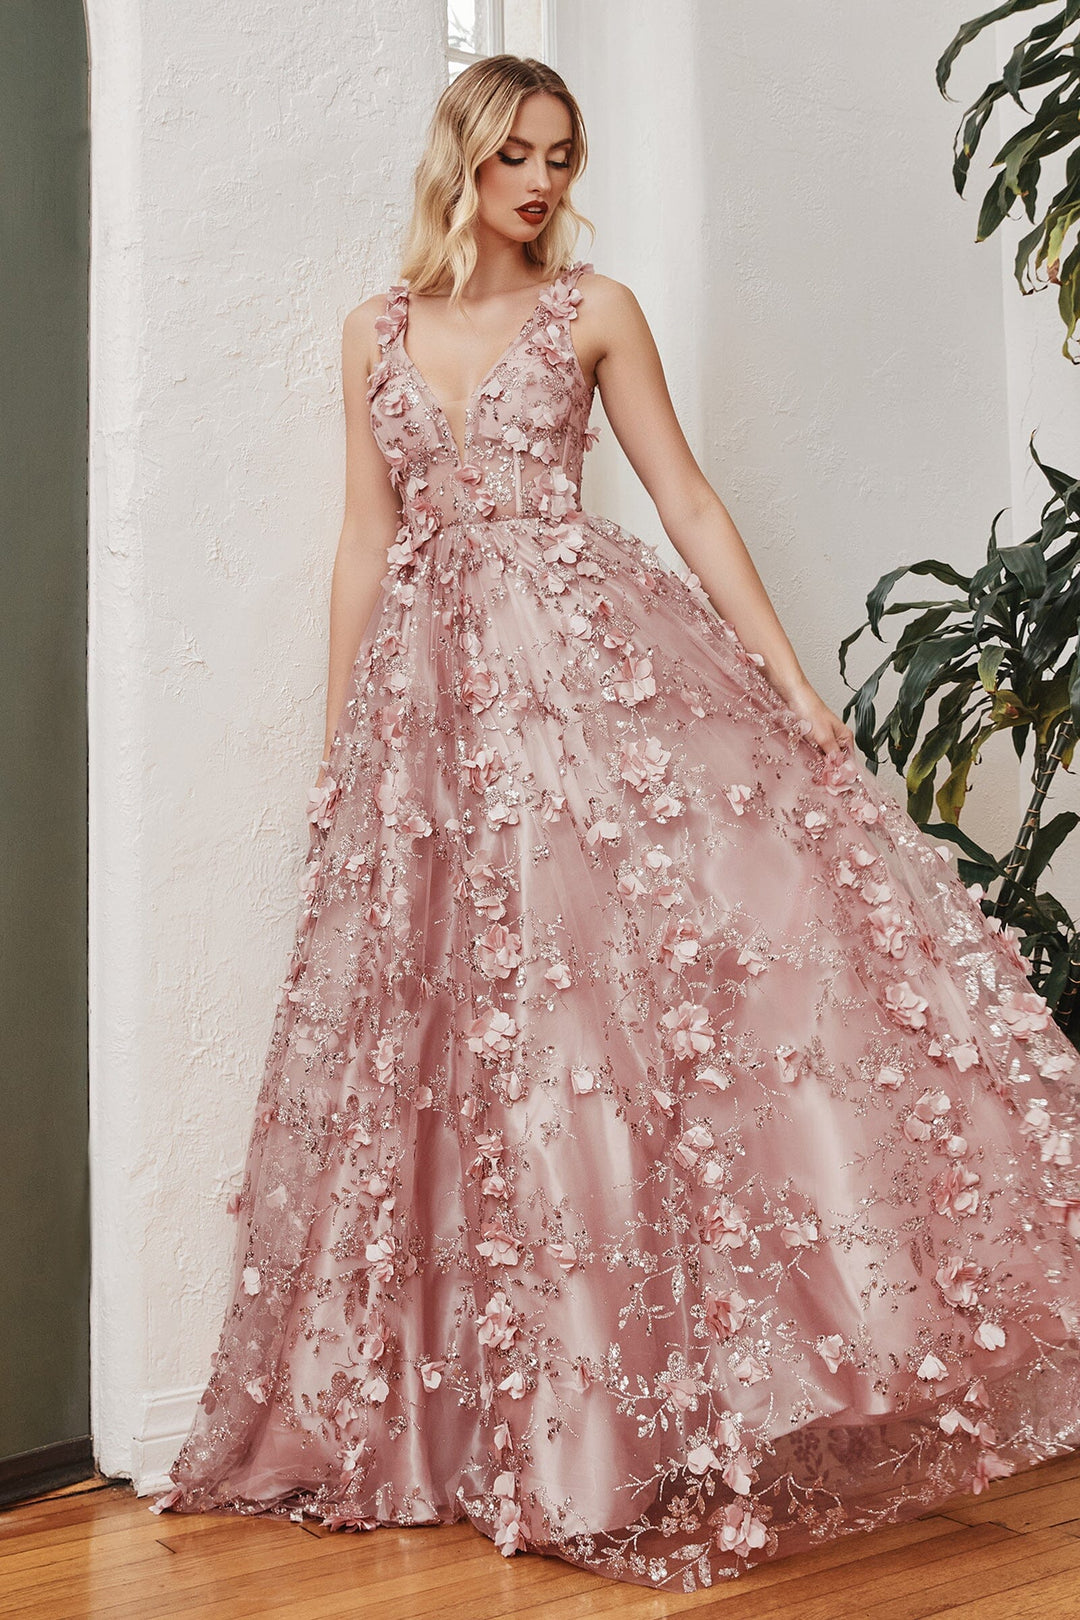 3D Floral Glitter Ball Gown by Ladivine J838